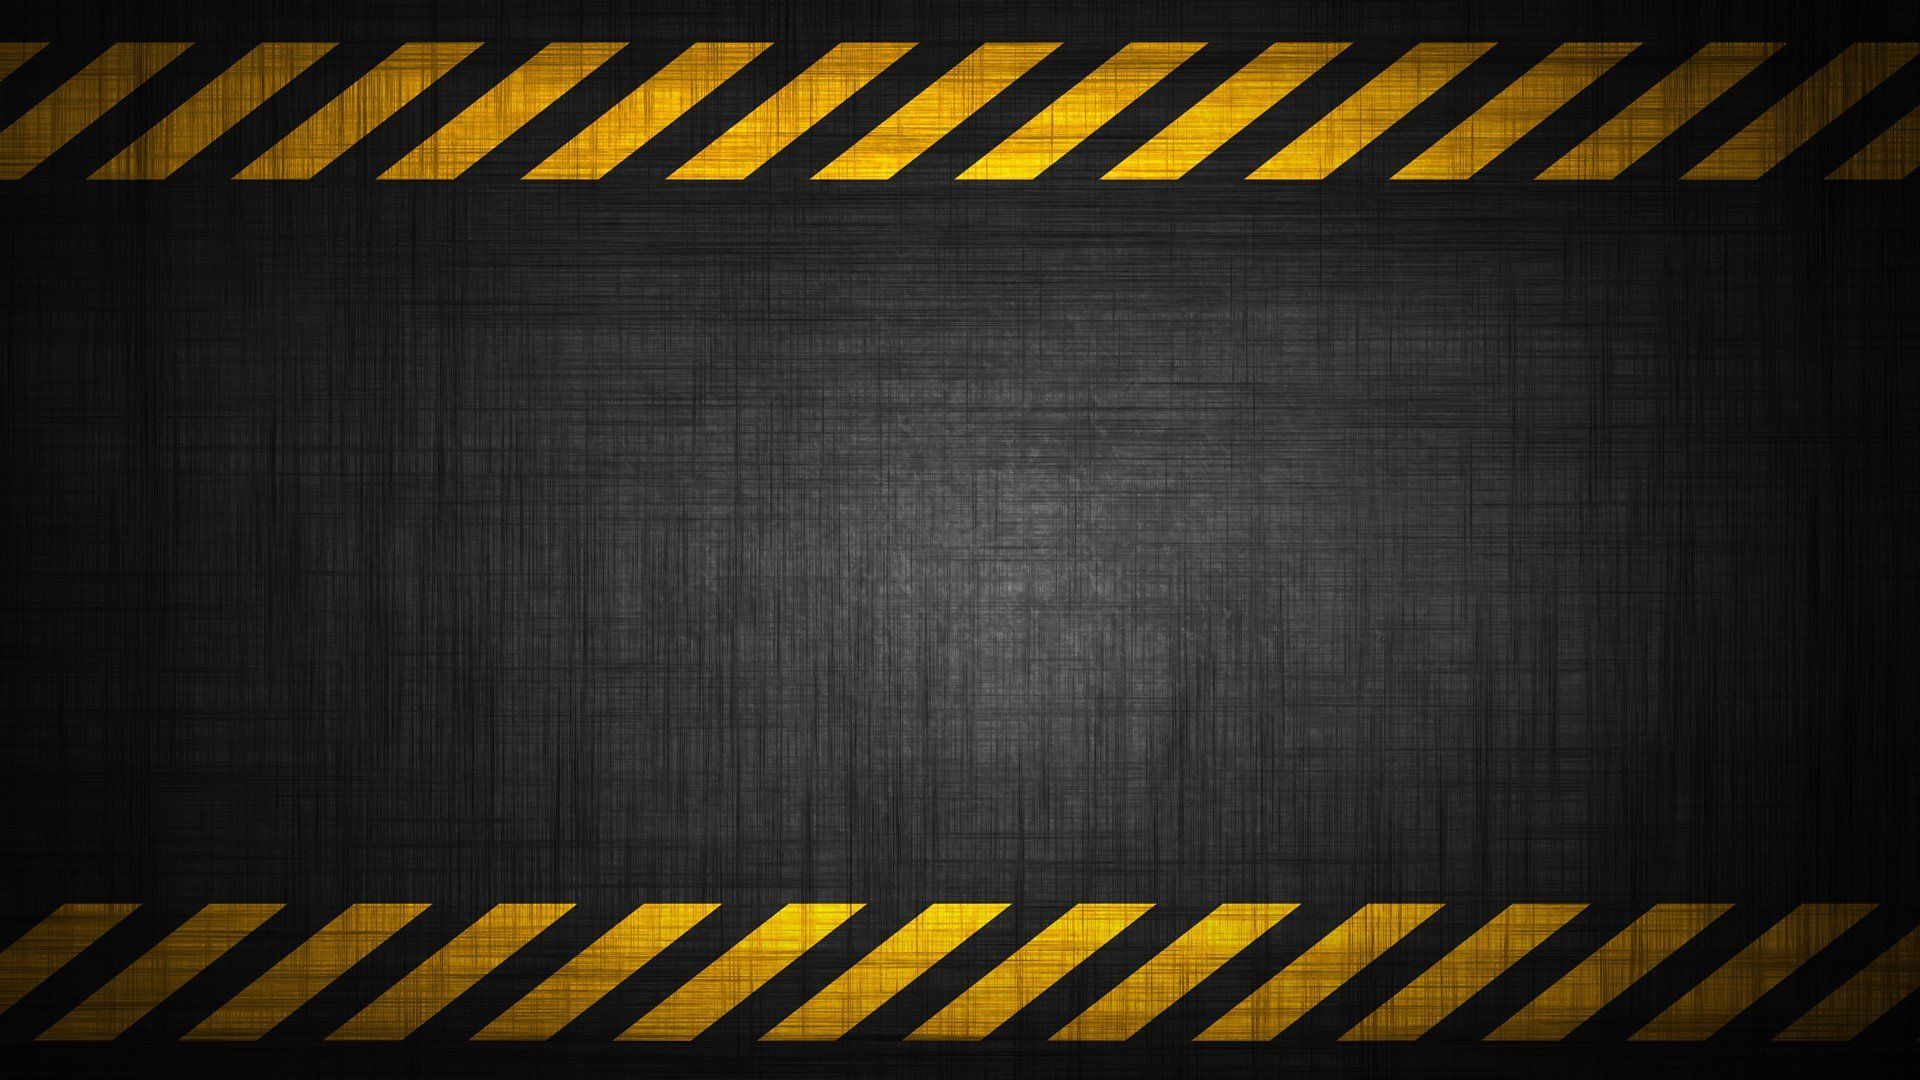 Caution tape warning background image .in.com